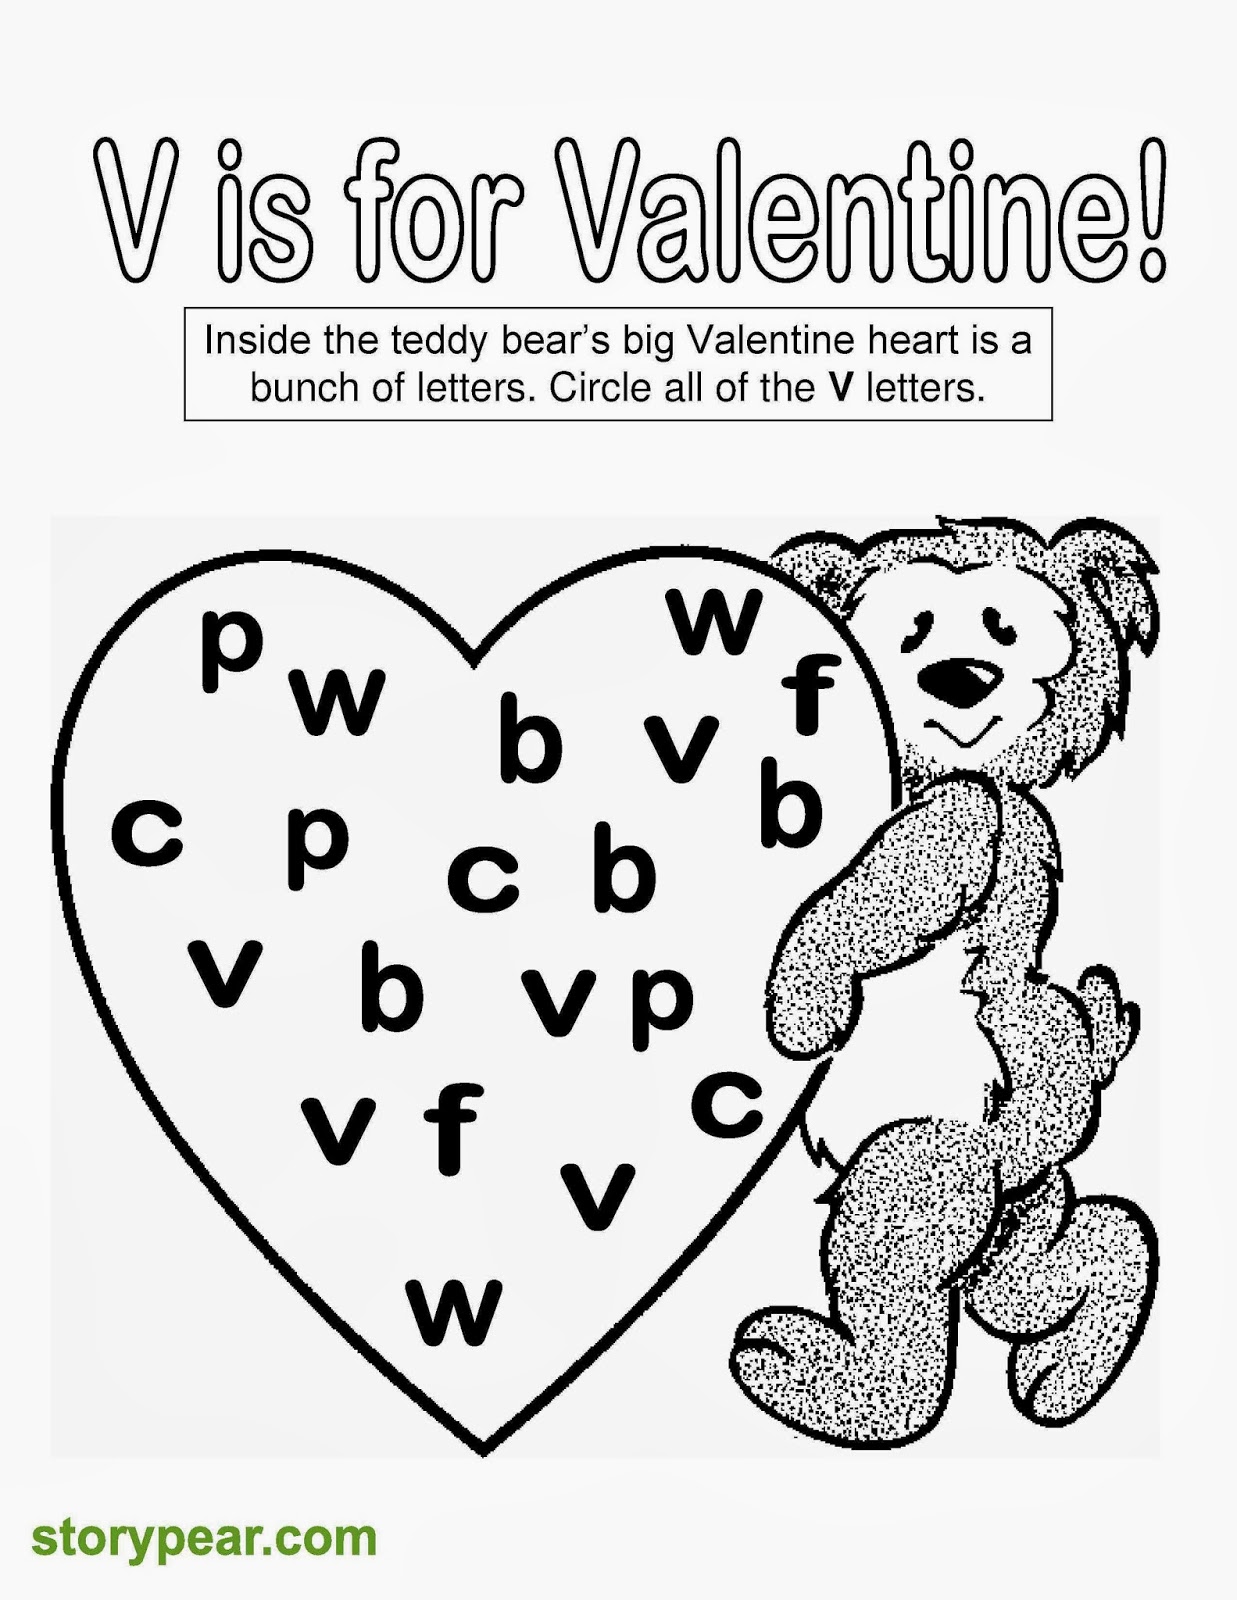 Story Pear Free Valentine Day s Printable Sheets For Preschoolers 